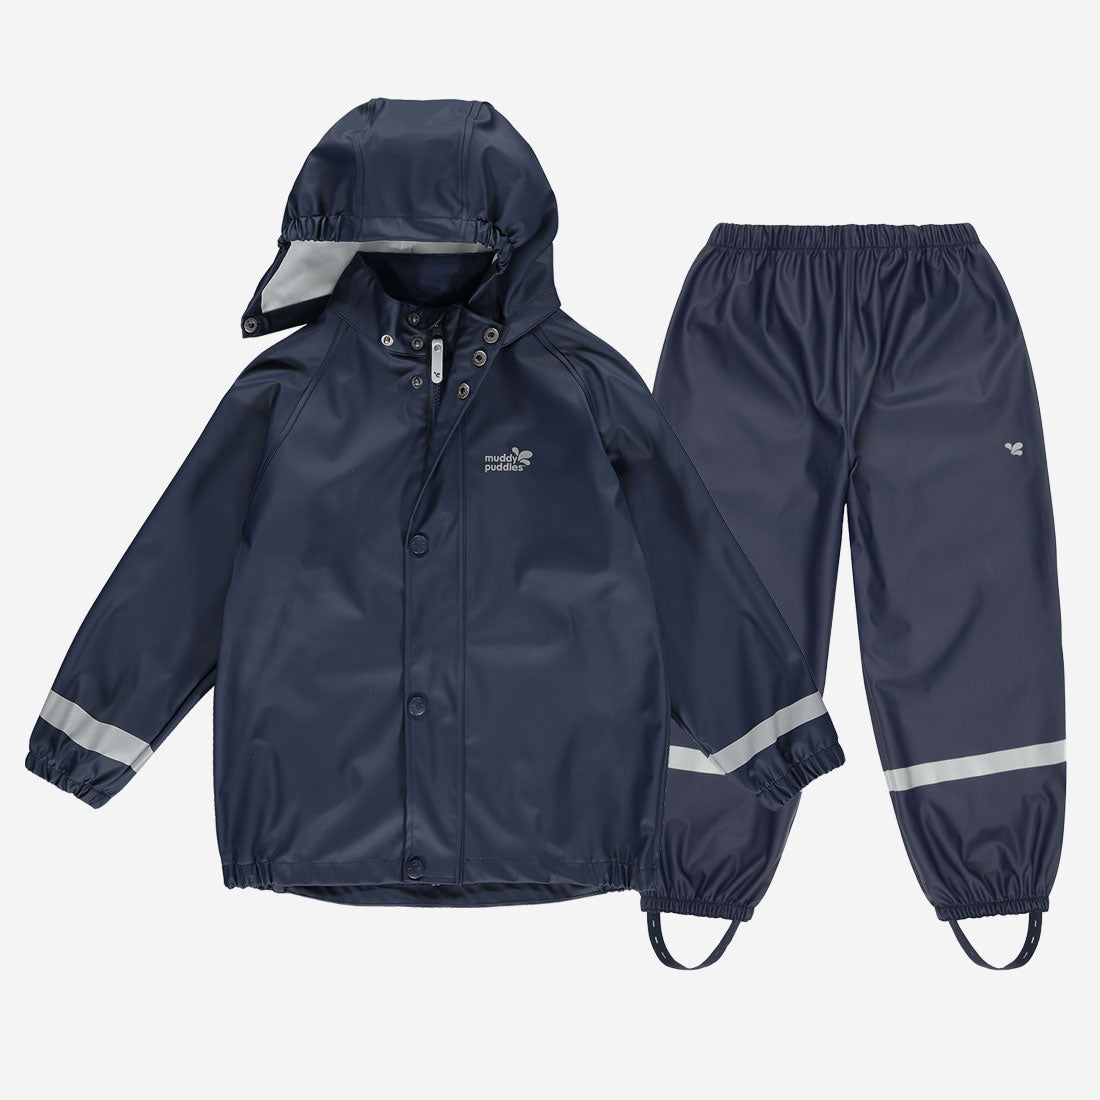 Rainy Day Trouser Set Navy Recycled